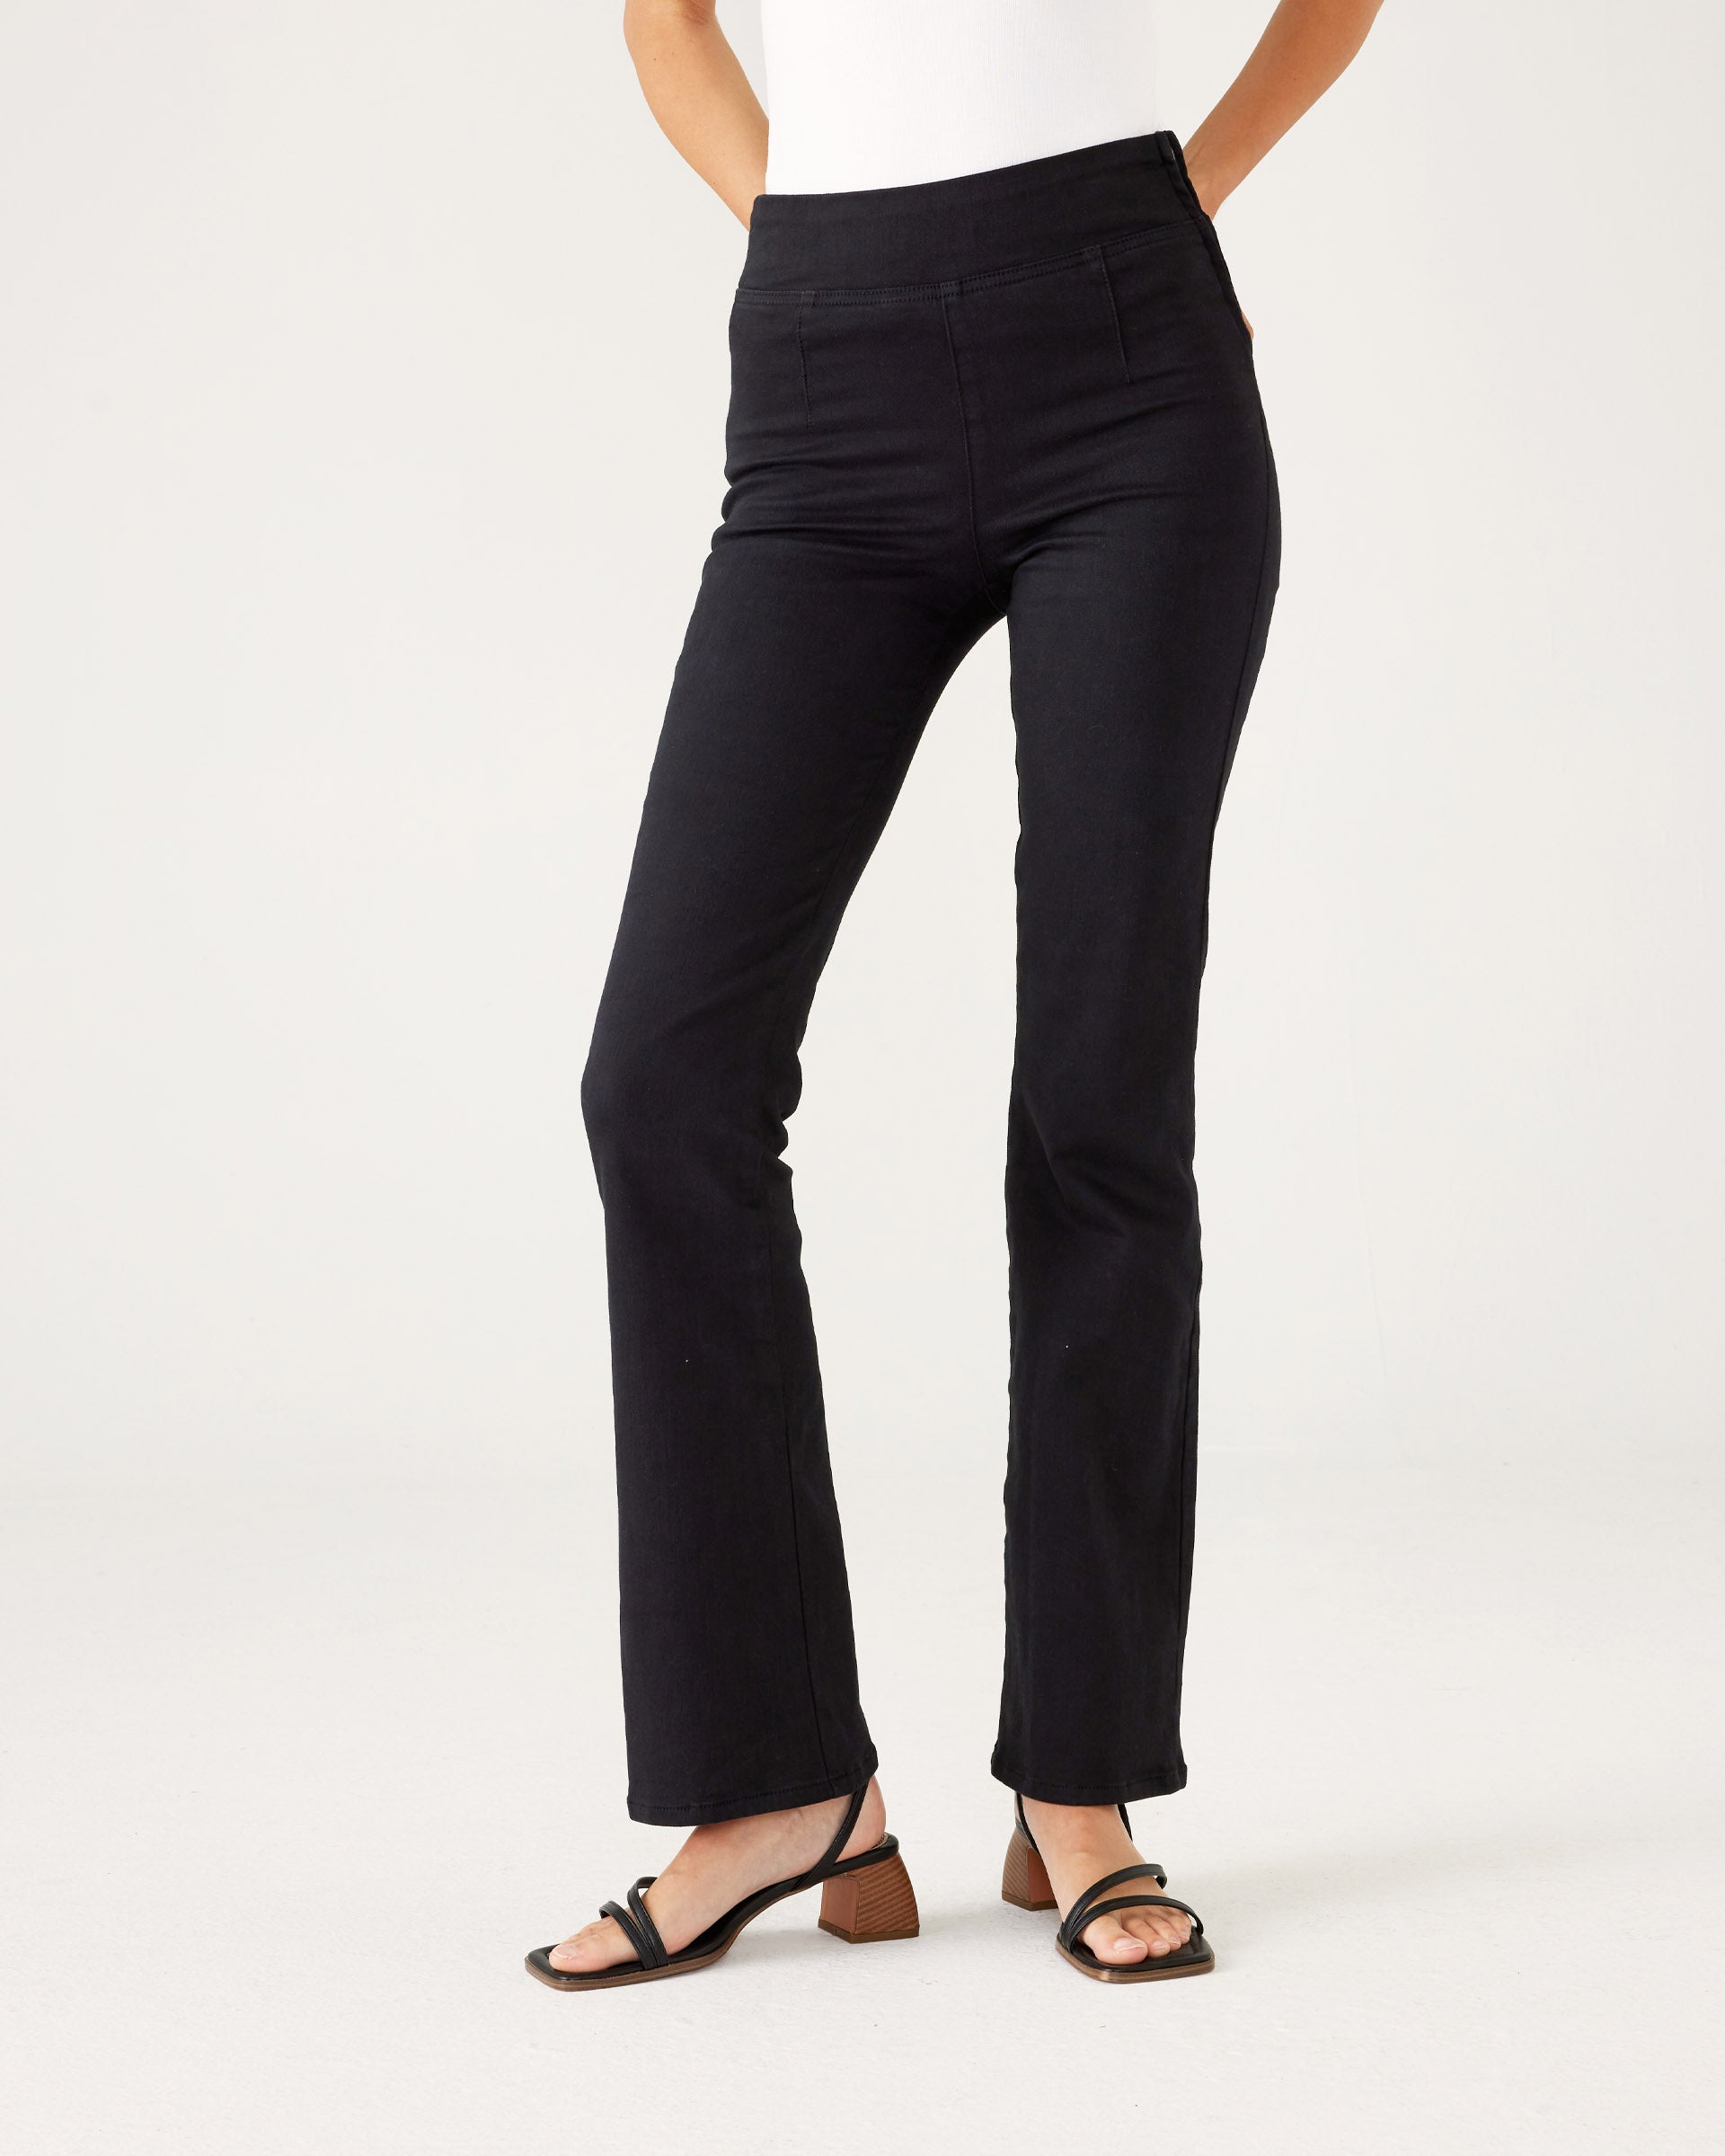 Lower body of Woman showcasing Mersea Nomad black denim full length boot-cut jeans against a white background